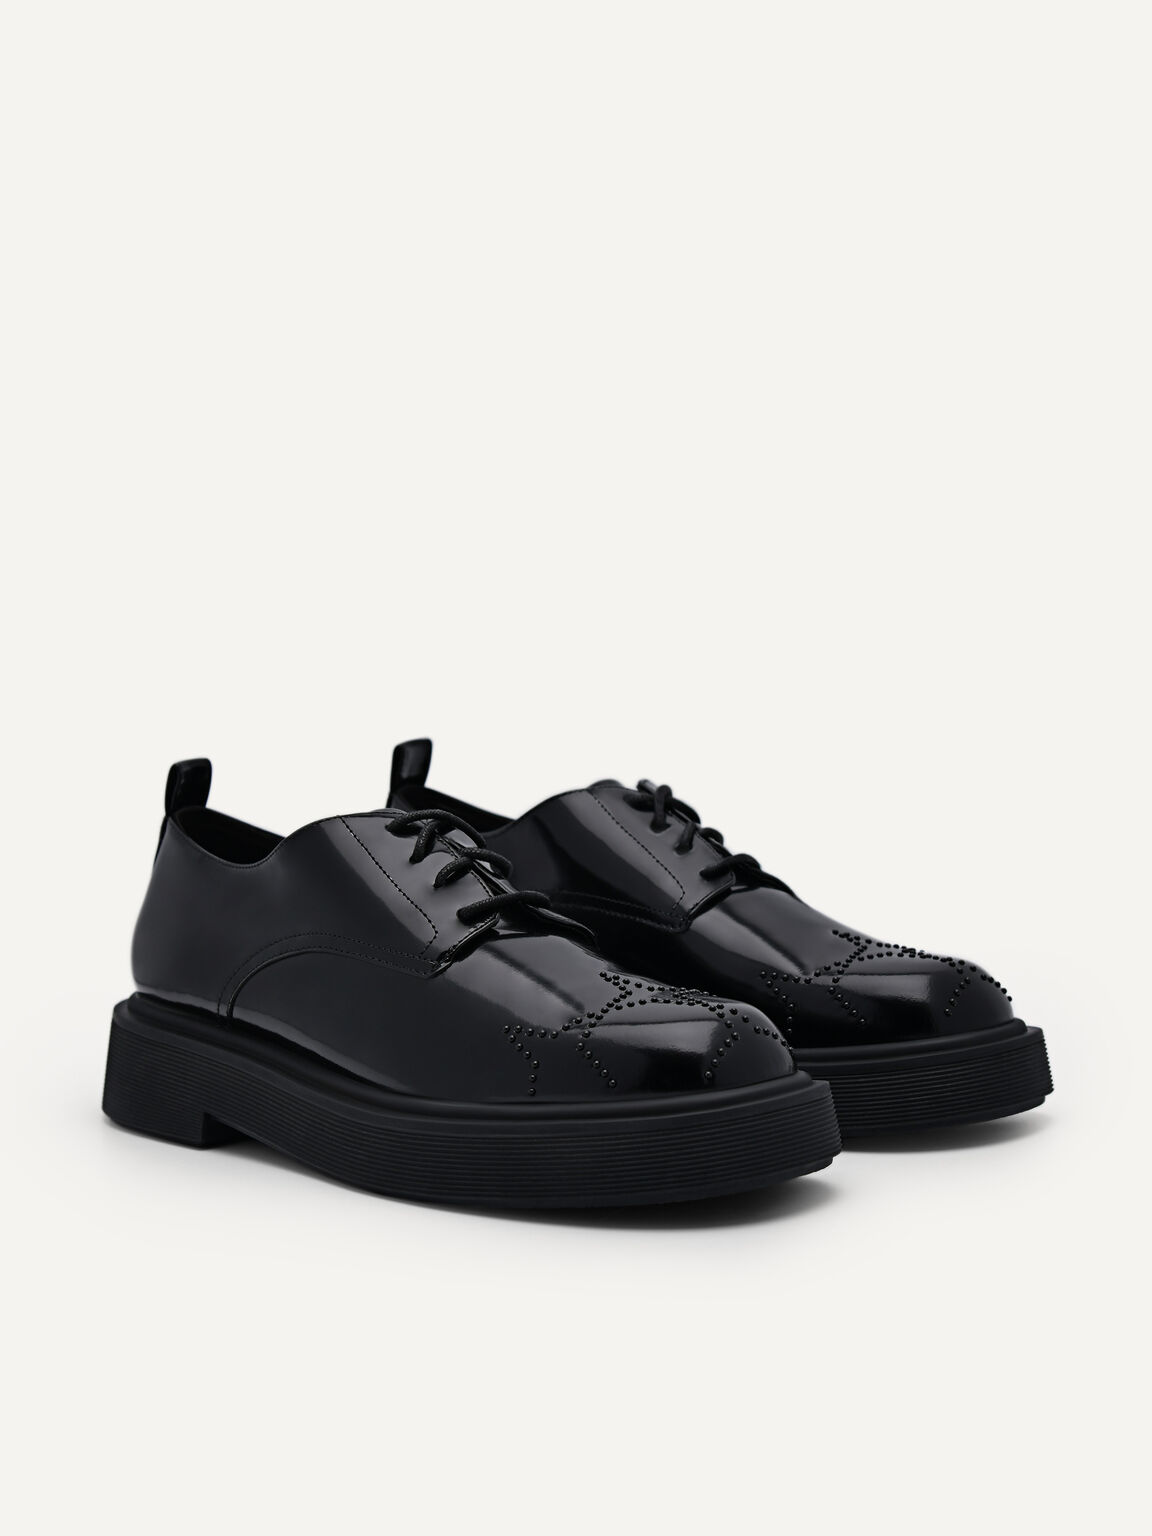 Maisie Leather Derby Shoes, Black